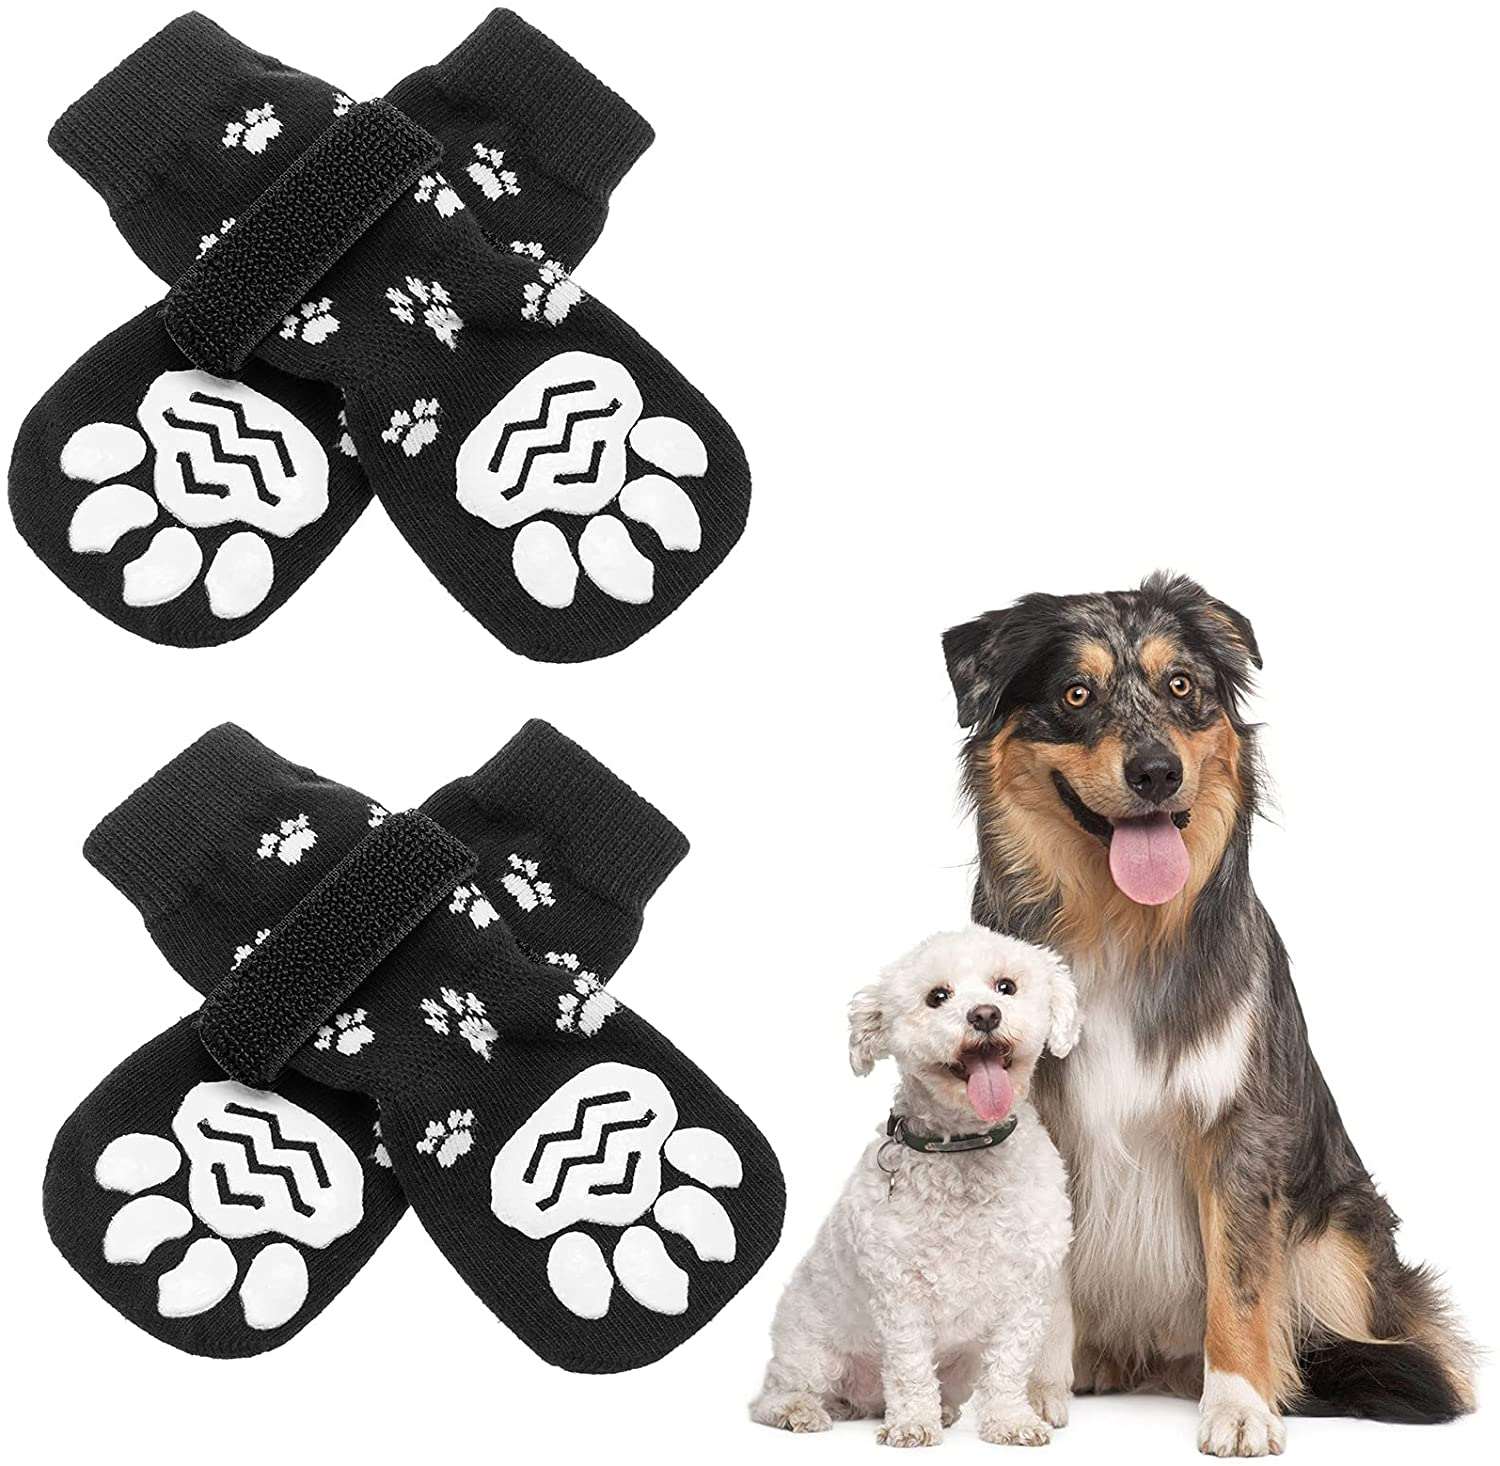 Non-slip Dog Socks Waterproof Dog Boots Cotton Pet Shoes Indoor Paw Guard  Soft Silicone Dog Shoes And Socks